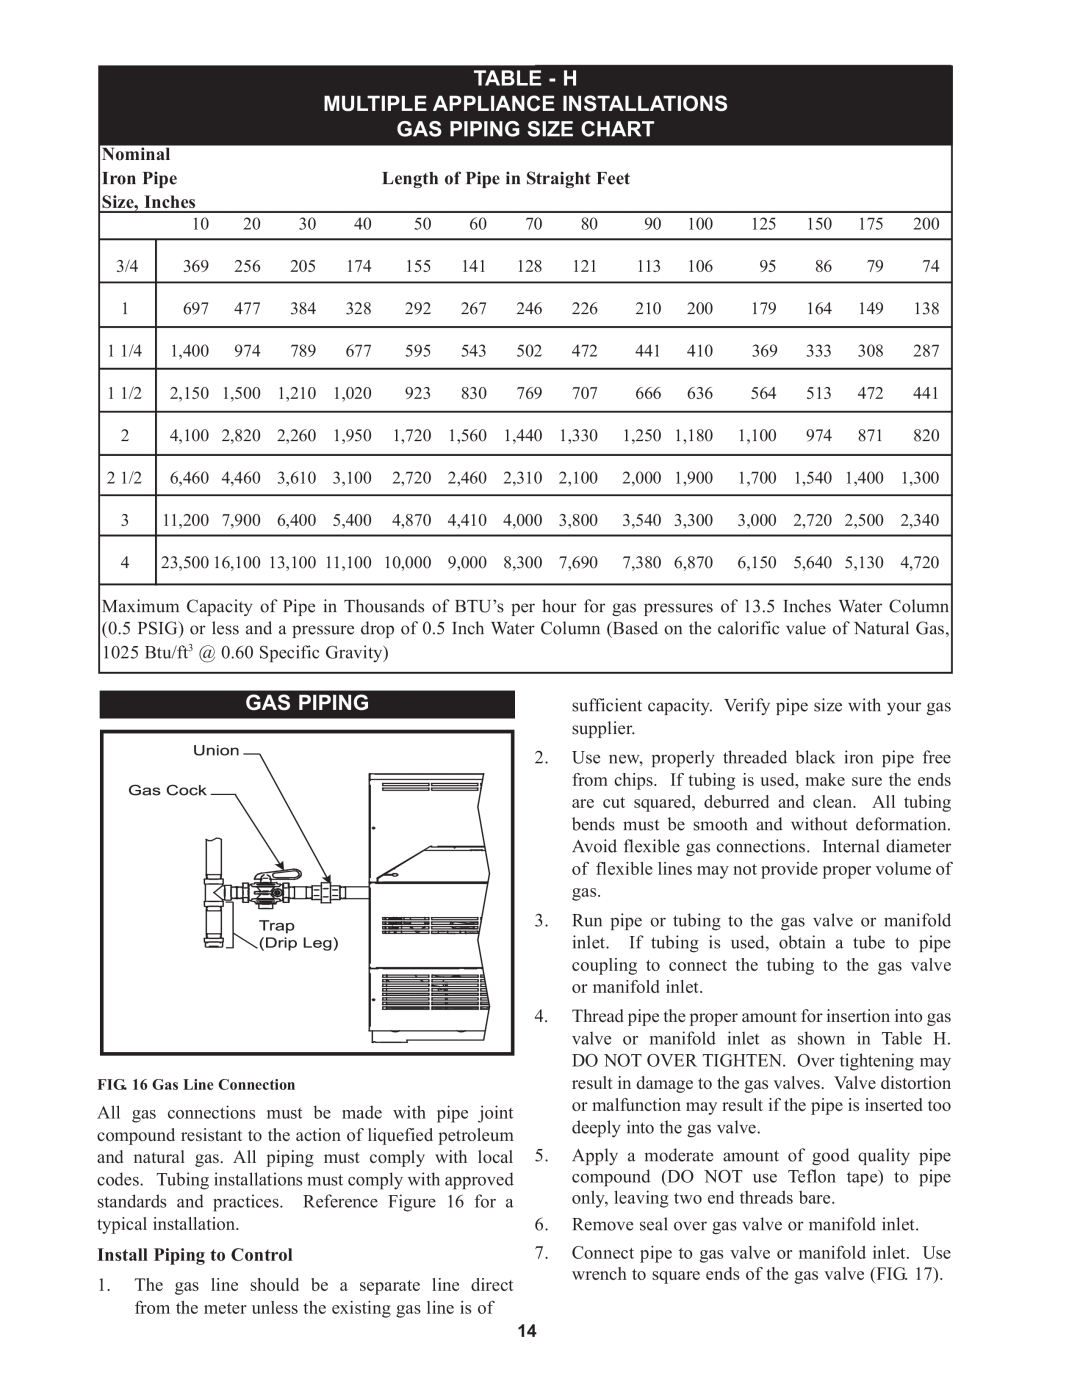 Lochinvar 000 Btu/hr Table - H Multiple Appliance Installations, Gas Piping Size Chart, Nominal, Iron Pipe, Size, Inches 